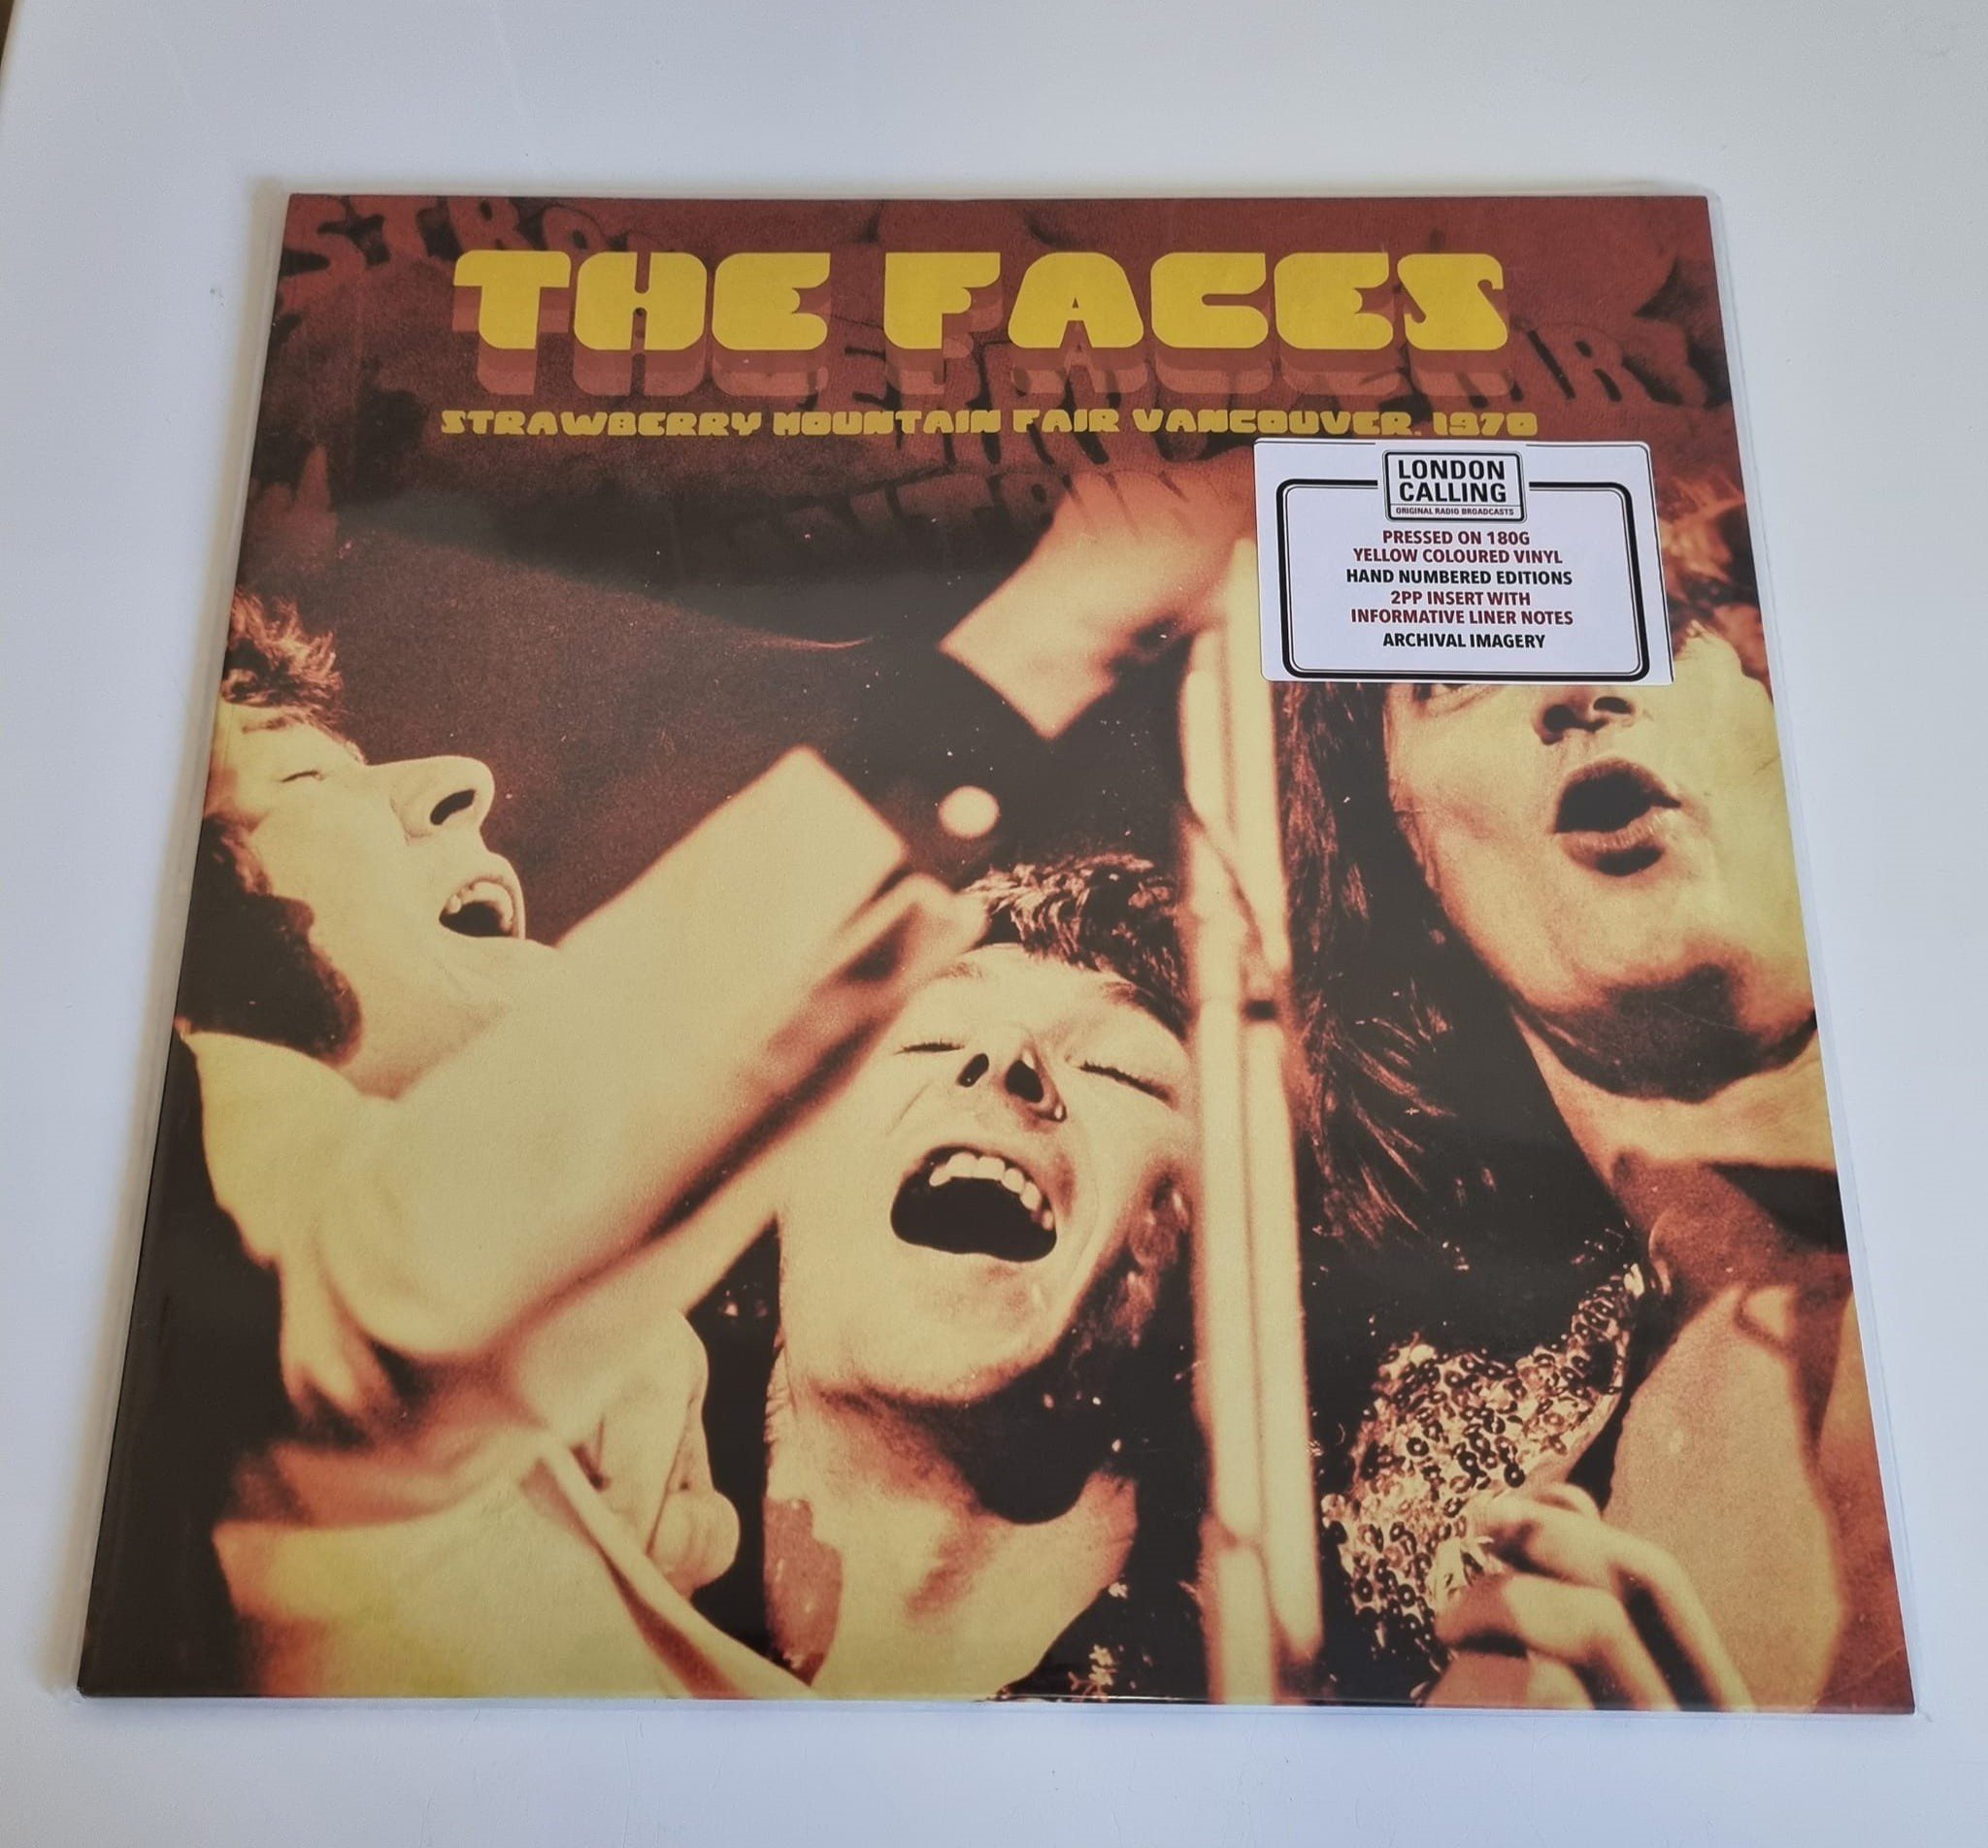 Buy this rare Faces record by clicking here